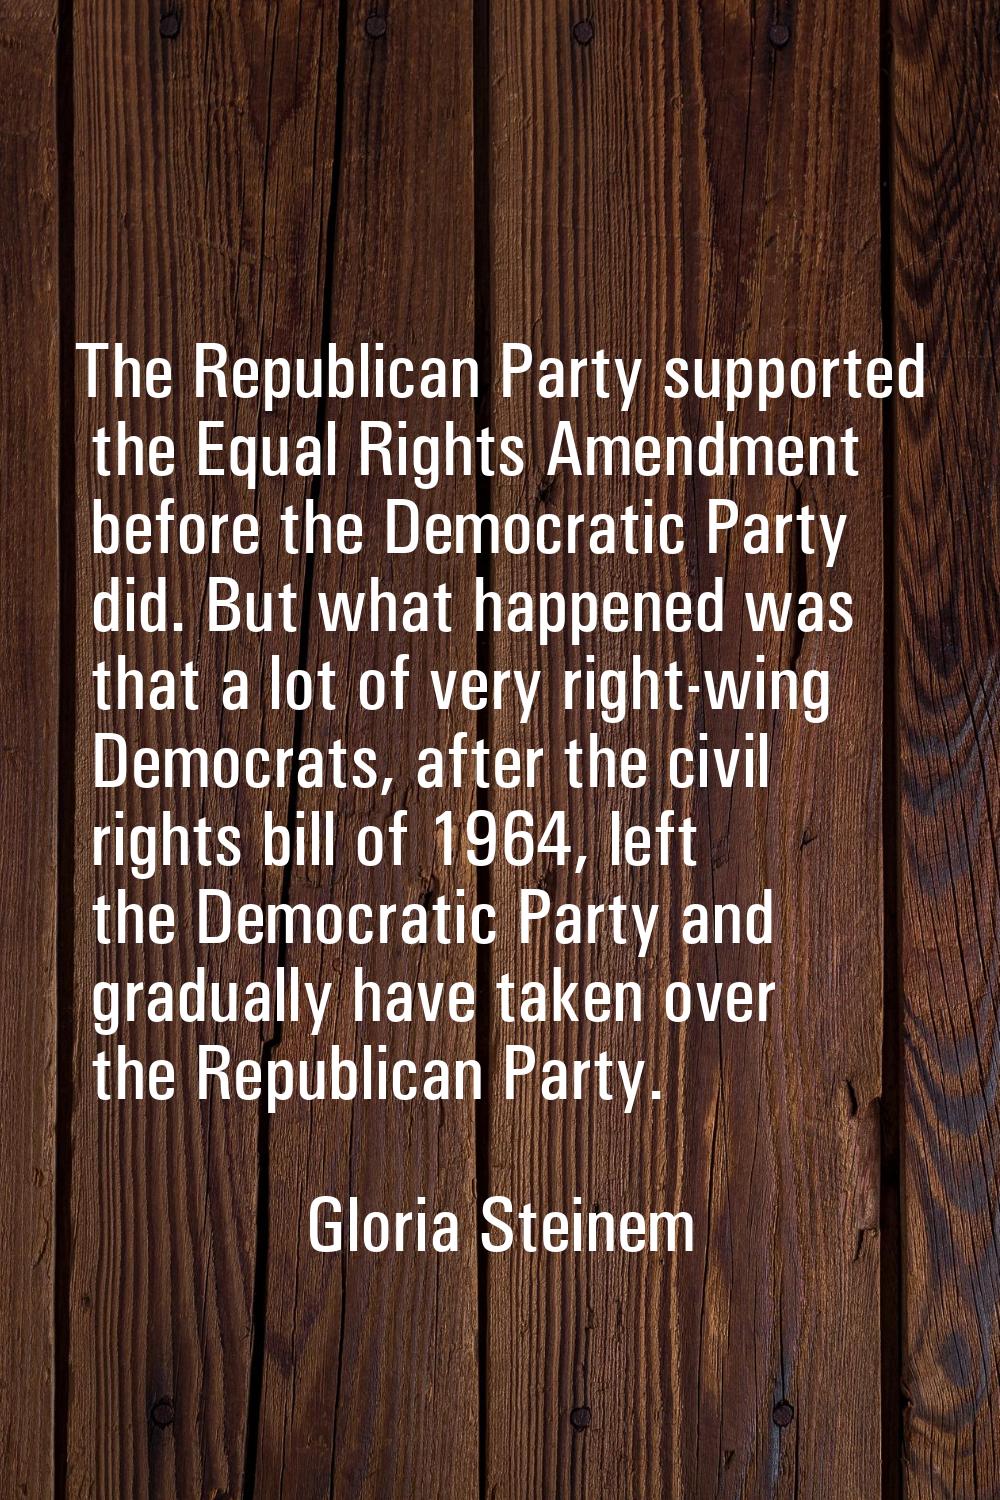 The Republican Party supported the Equal Rights Amendment before the Democratic Party did. But what